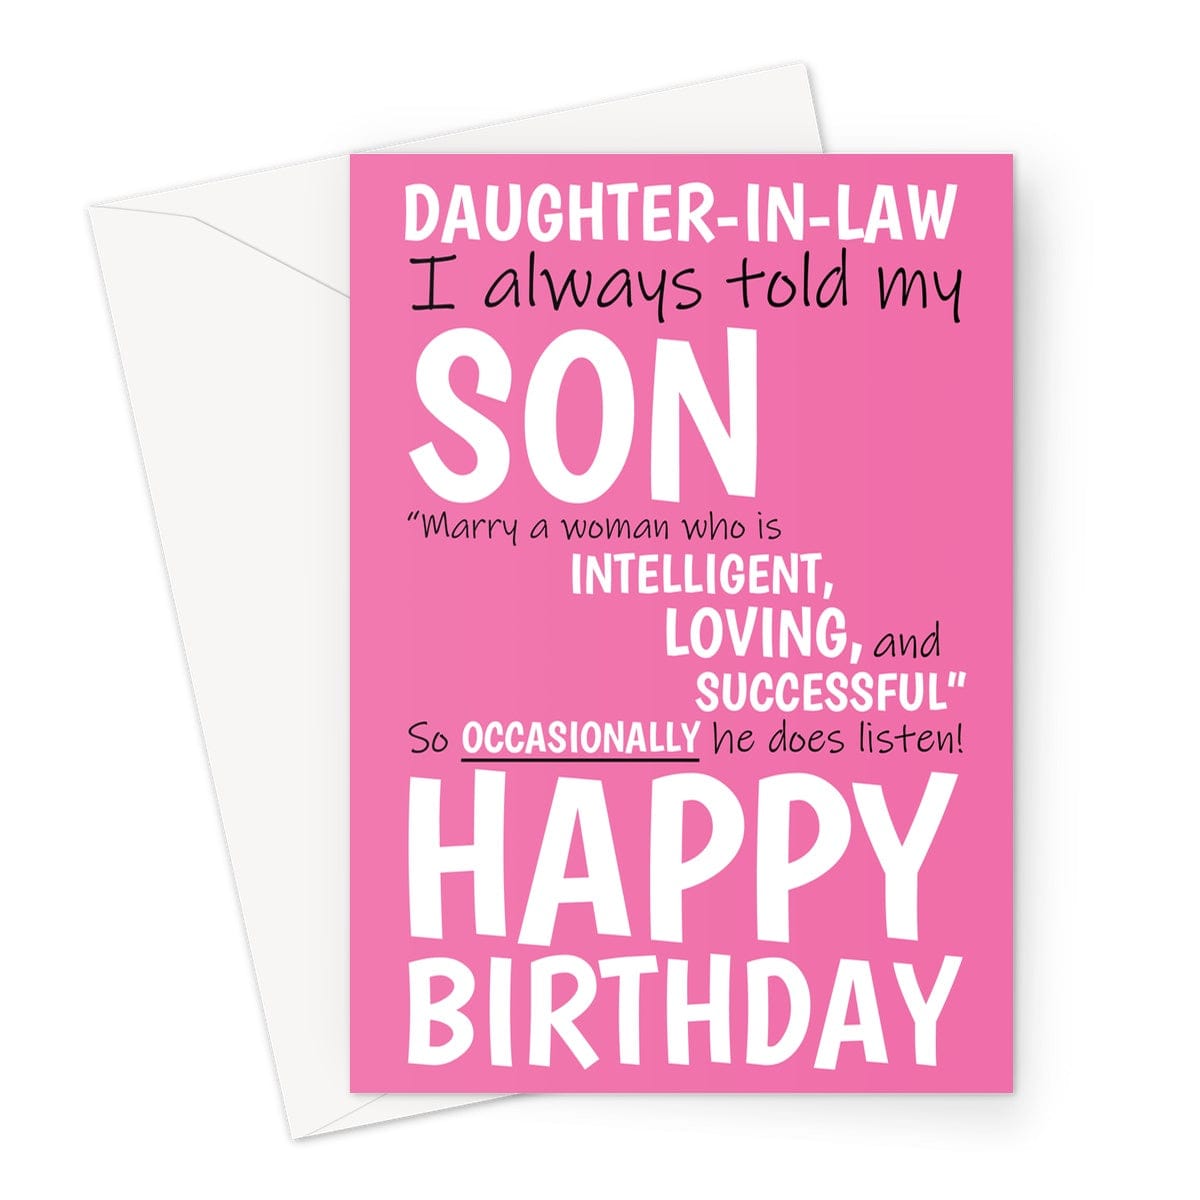 Happy Birthday Card For Daughter-in-law - My Son Does Listen - A5 ...